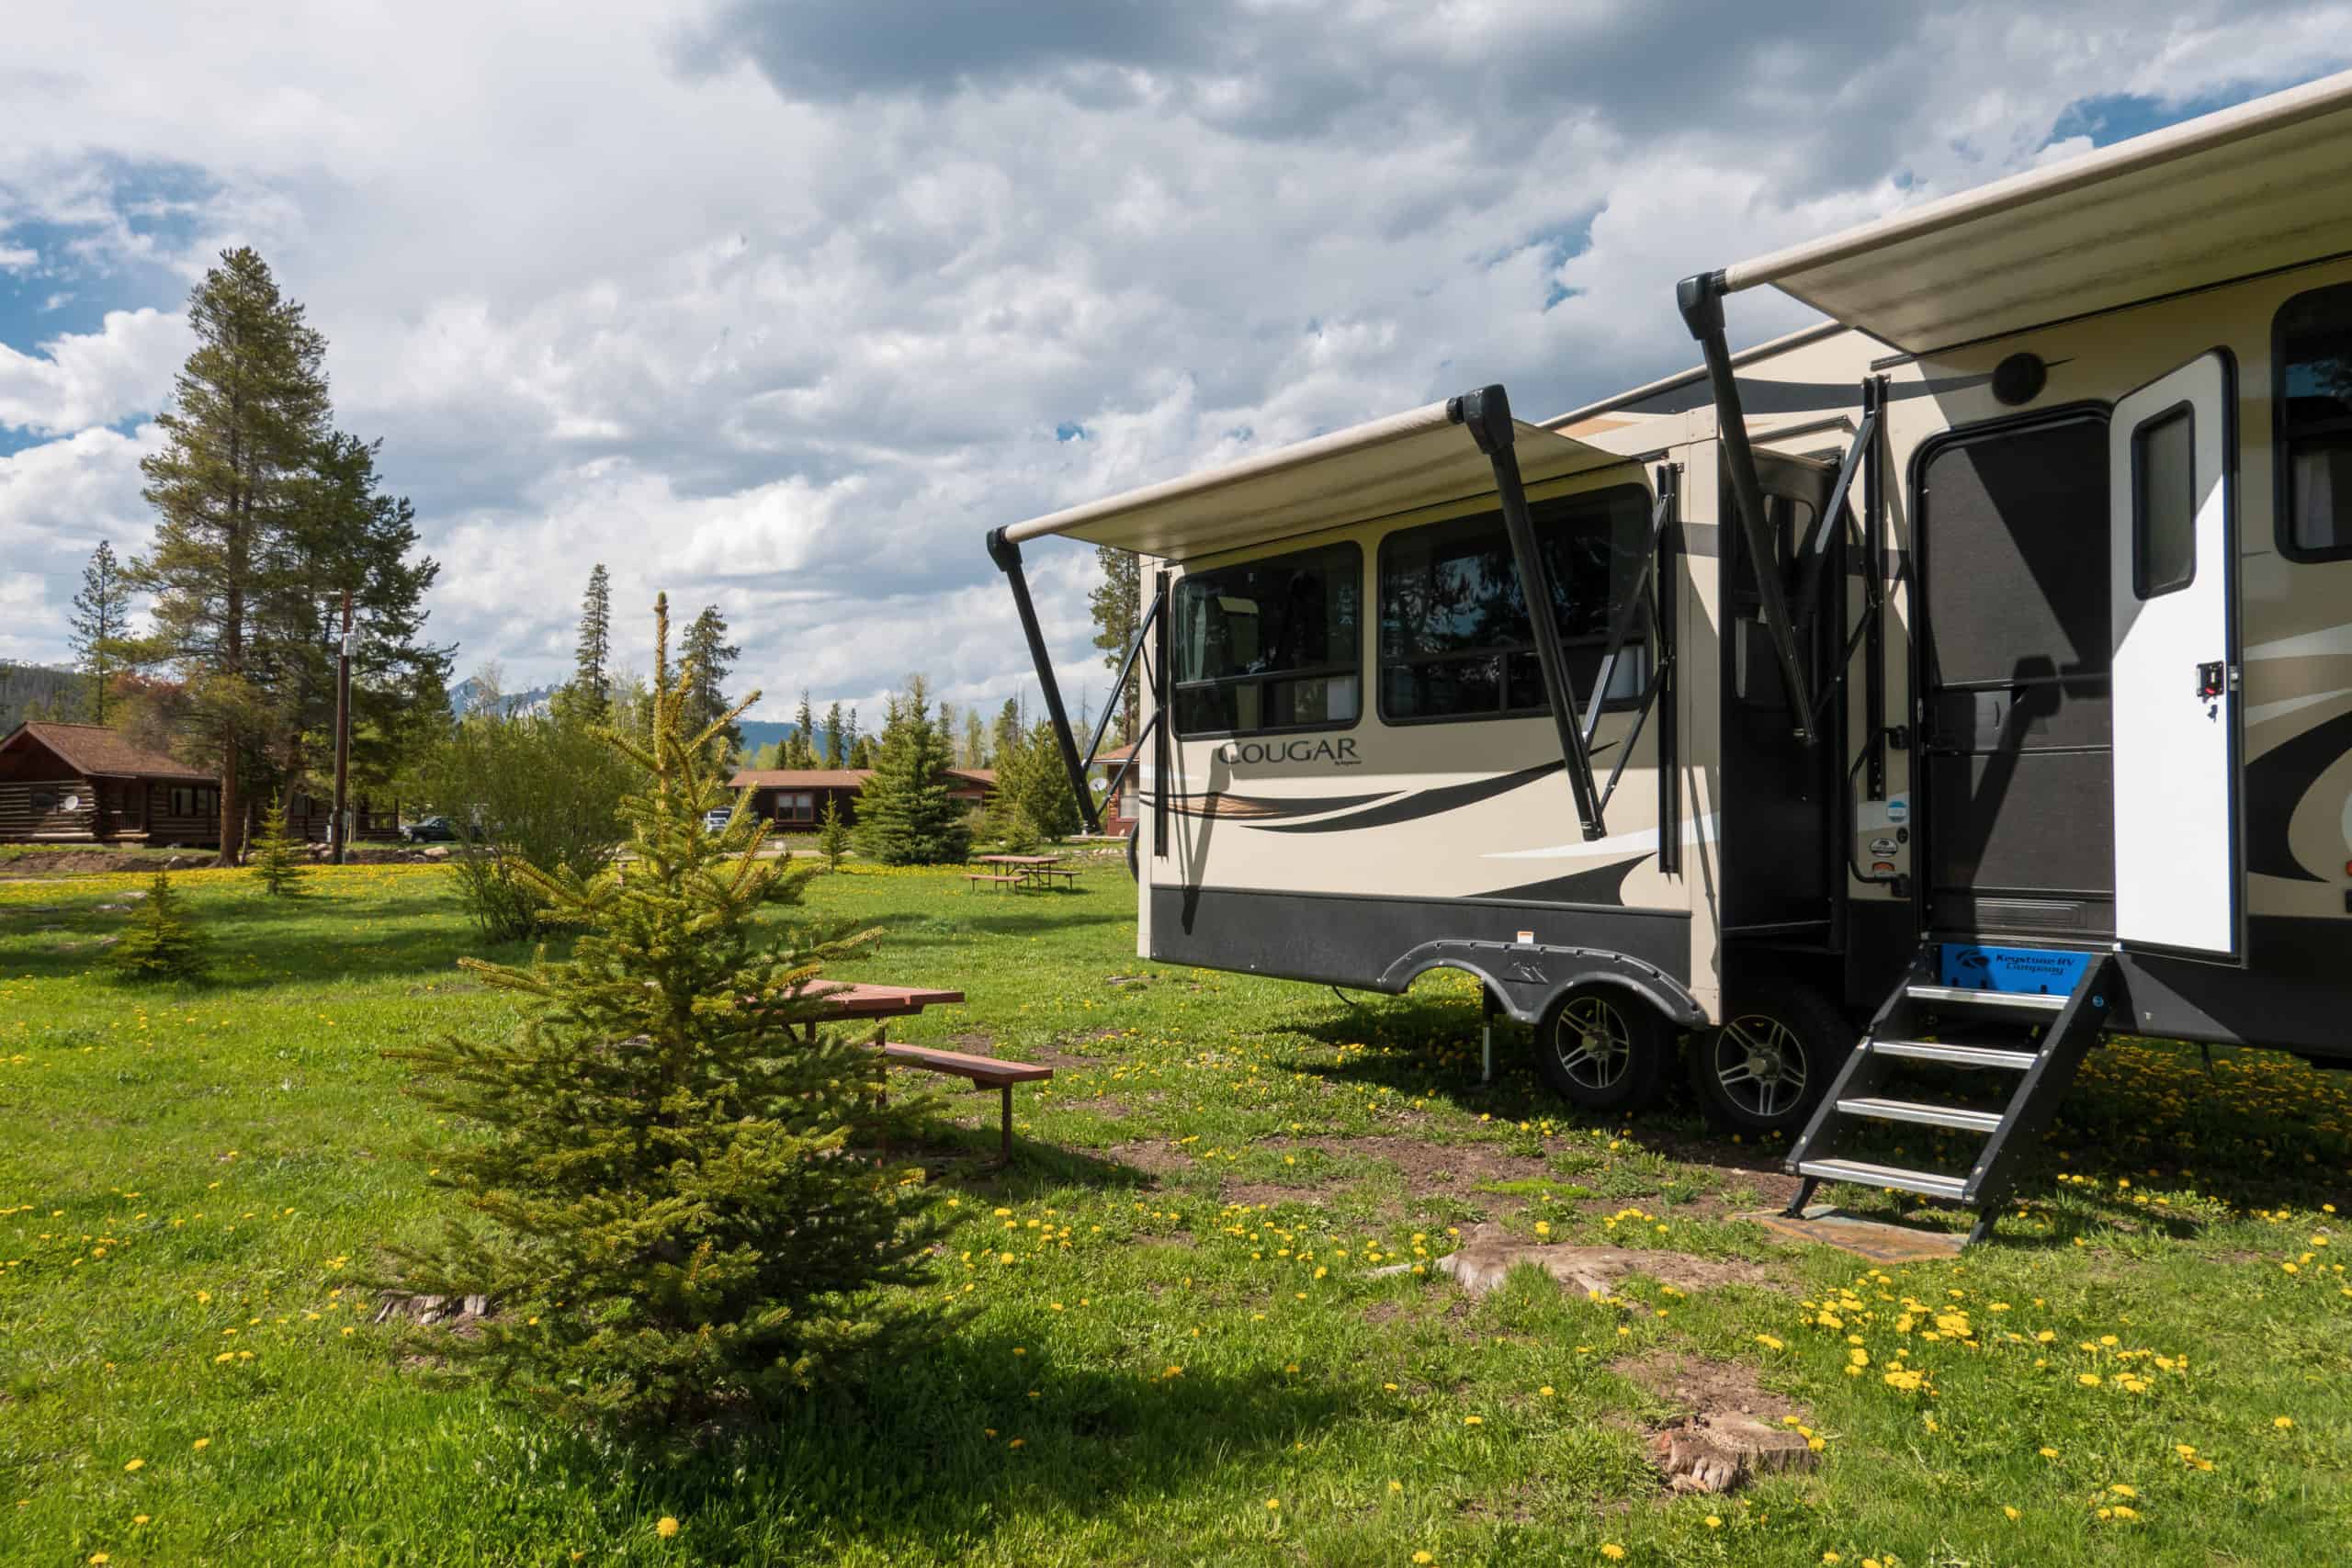 14 of the Best RV Parks in North America According to 9 Lady RVers